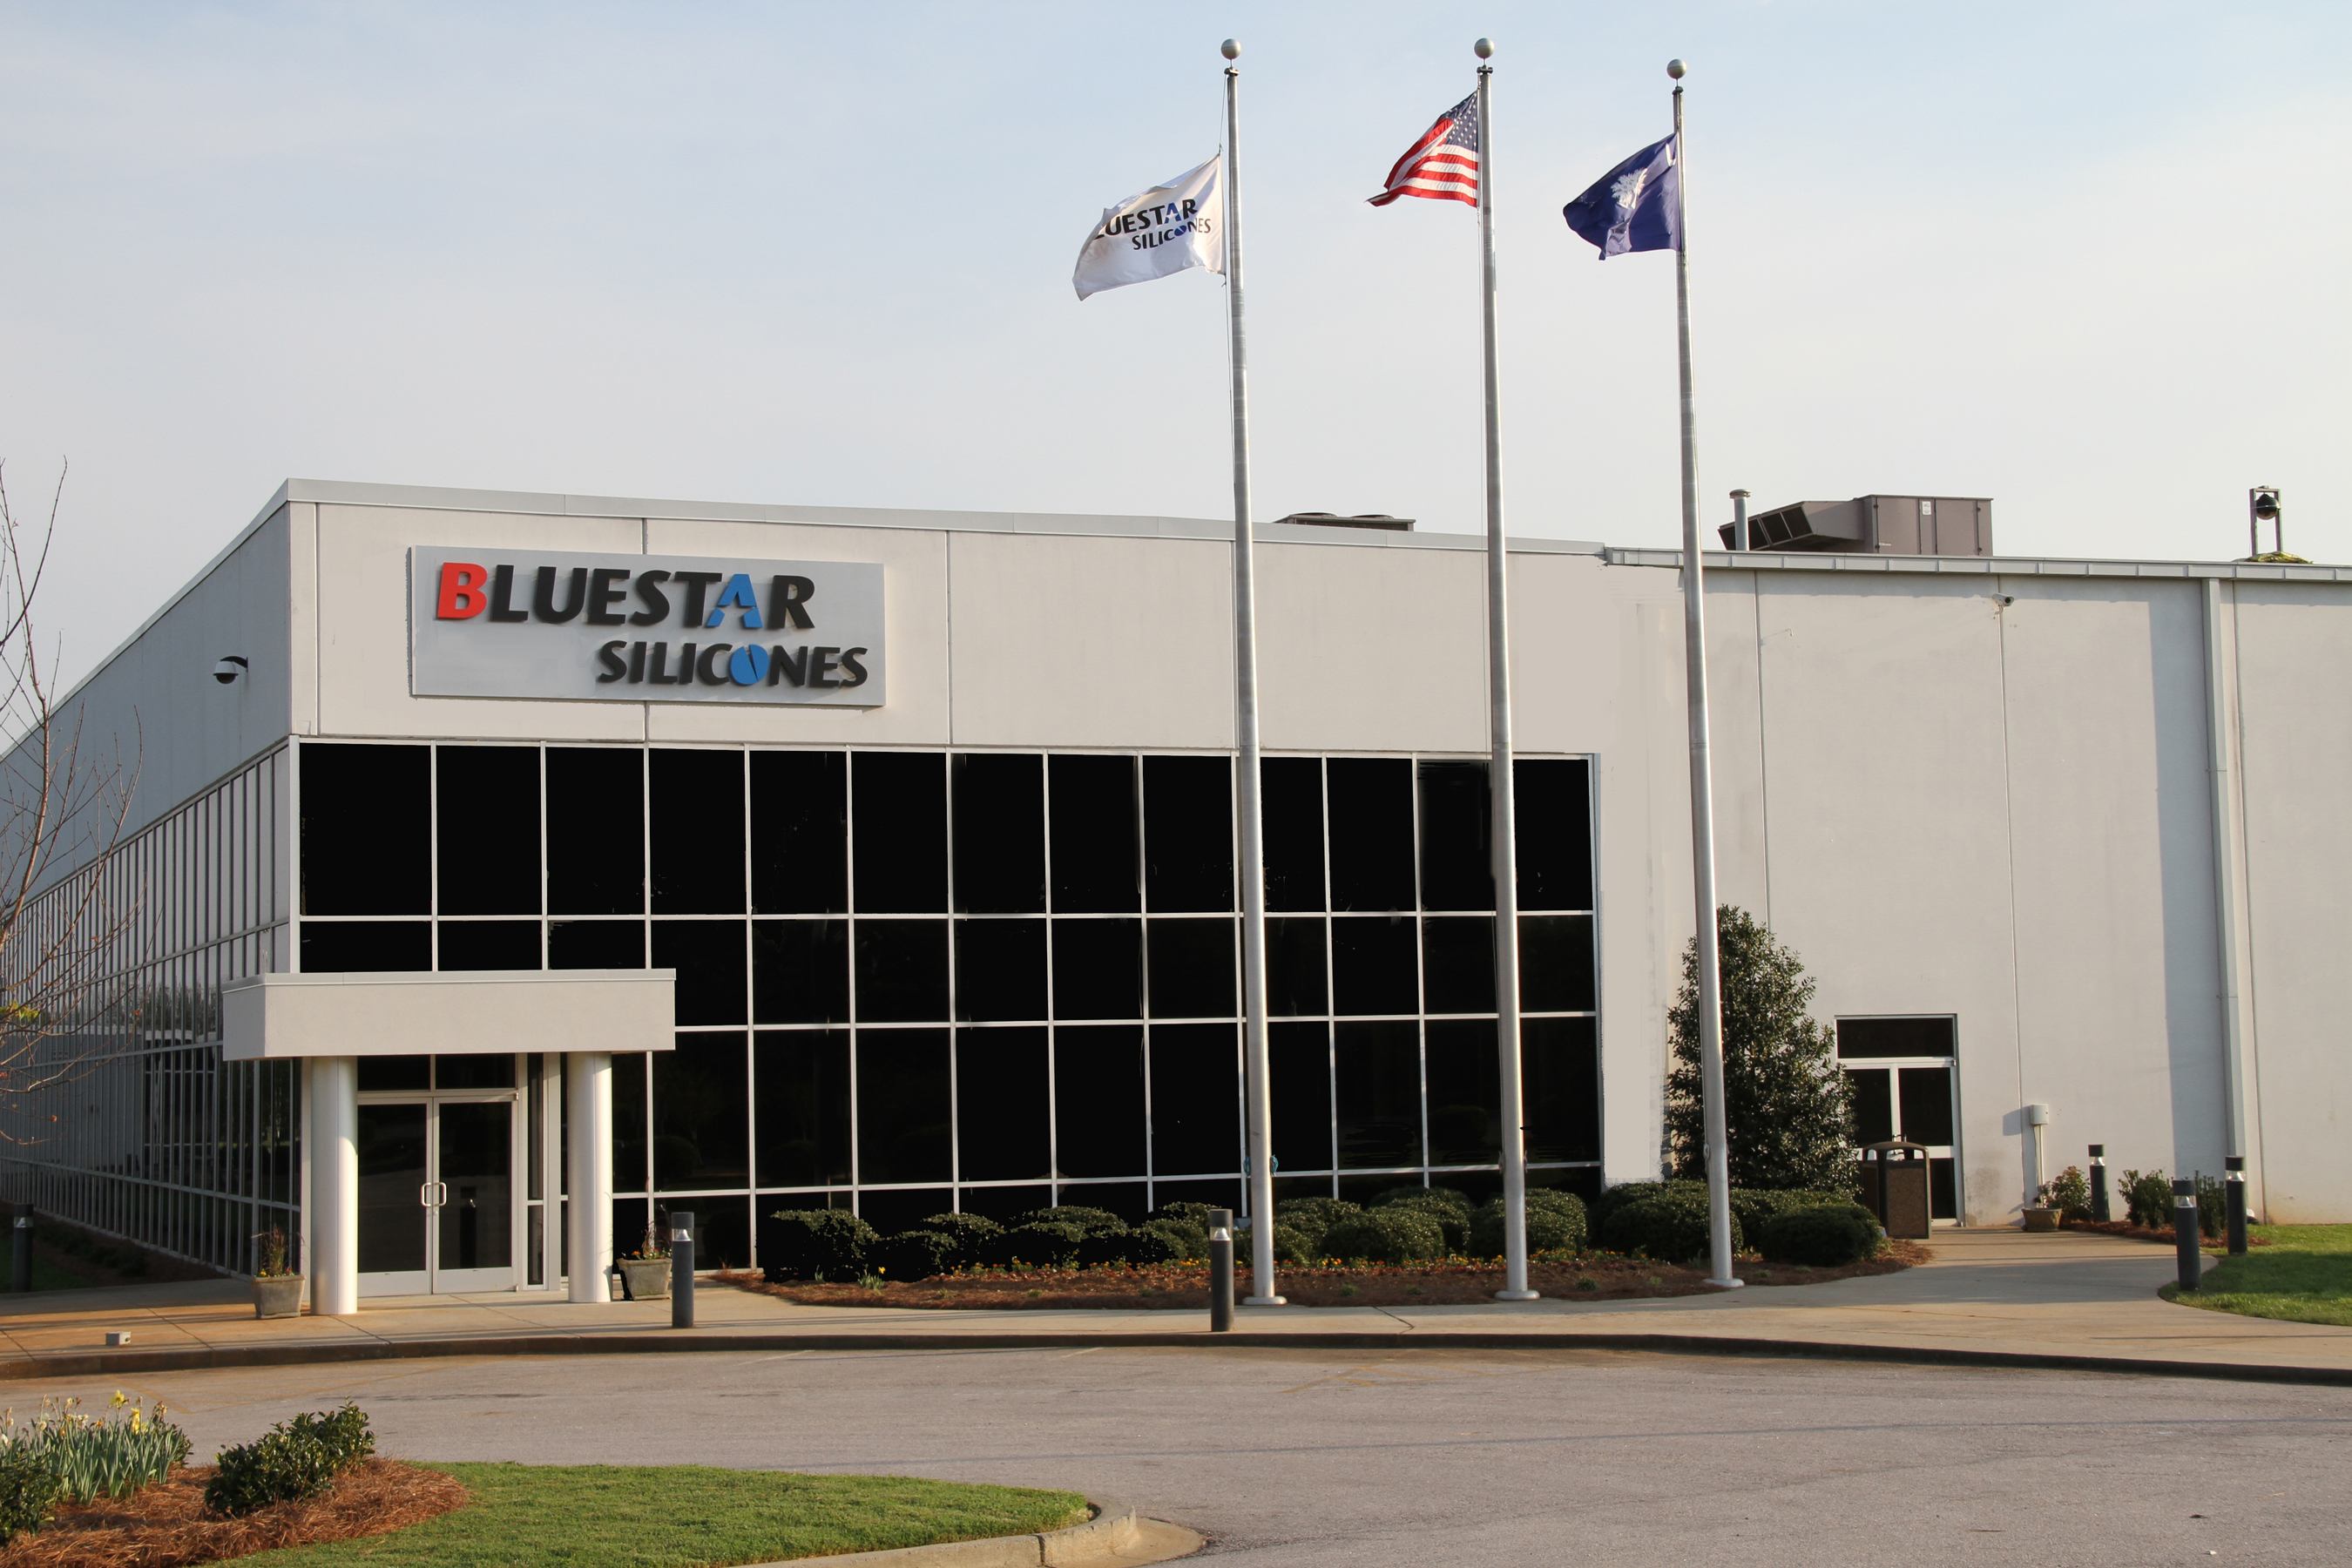 Bluestar Silicones, a global integrated silicones supplier, has achieved certification under the Responsible Care(R) Management System (RCMS) at its U.S. manufacturing facility located in York, S.C. The company produces an extensive range of silicone technologies in York including LSR, HCR, RTV, UV/EB and Thermal Cure Release Coatings, Gels, Emulsions, Functionalized Fluids and Resins and Greases and Compounds, in support of diverse specialty markets including paper release, textile coatings, healthcare, moldmaking, automotive, aerospace, and personal care. (PRNewsFoto/Bluestar Silicones)